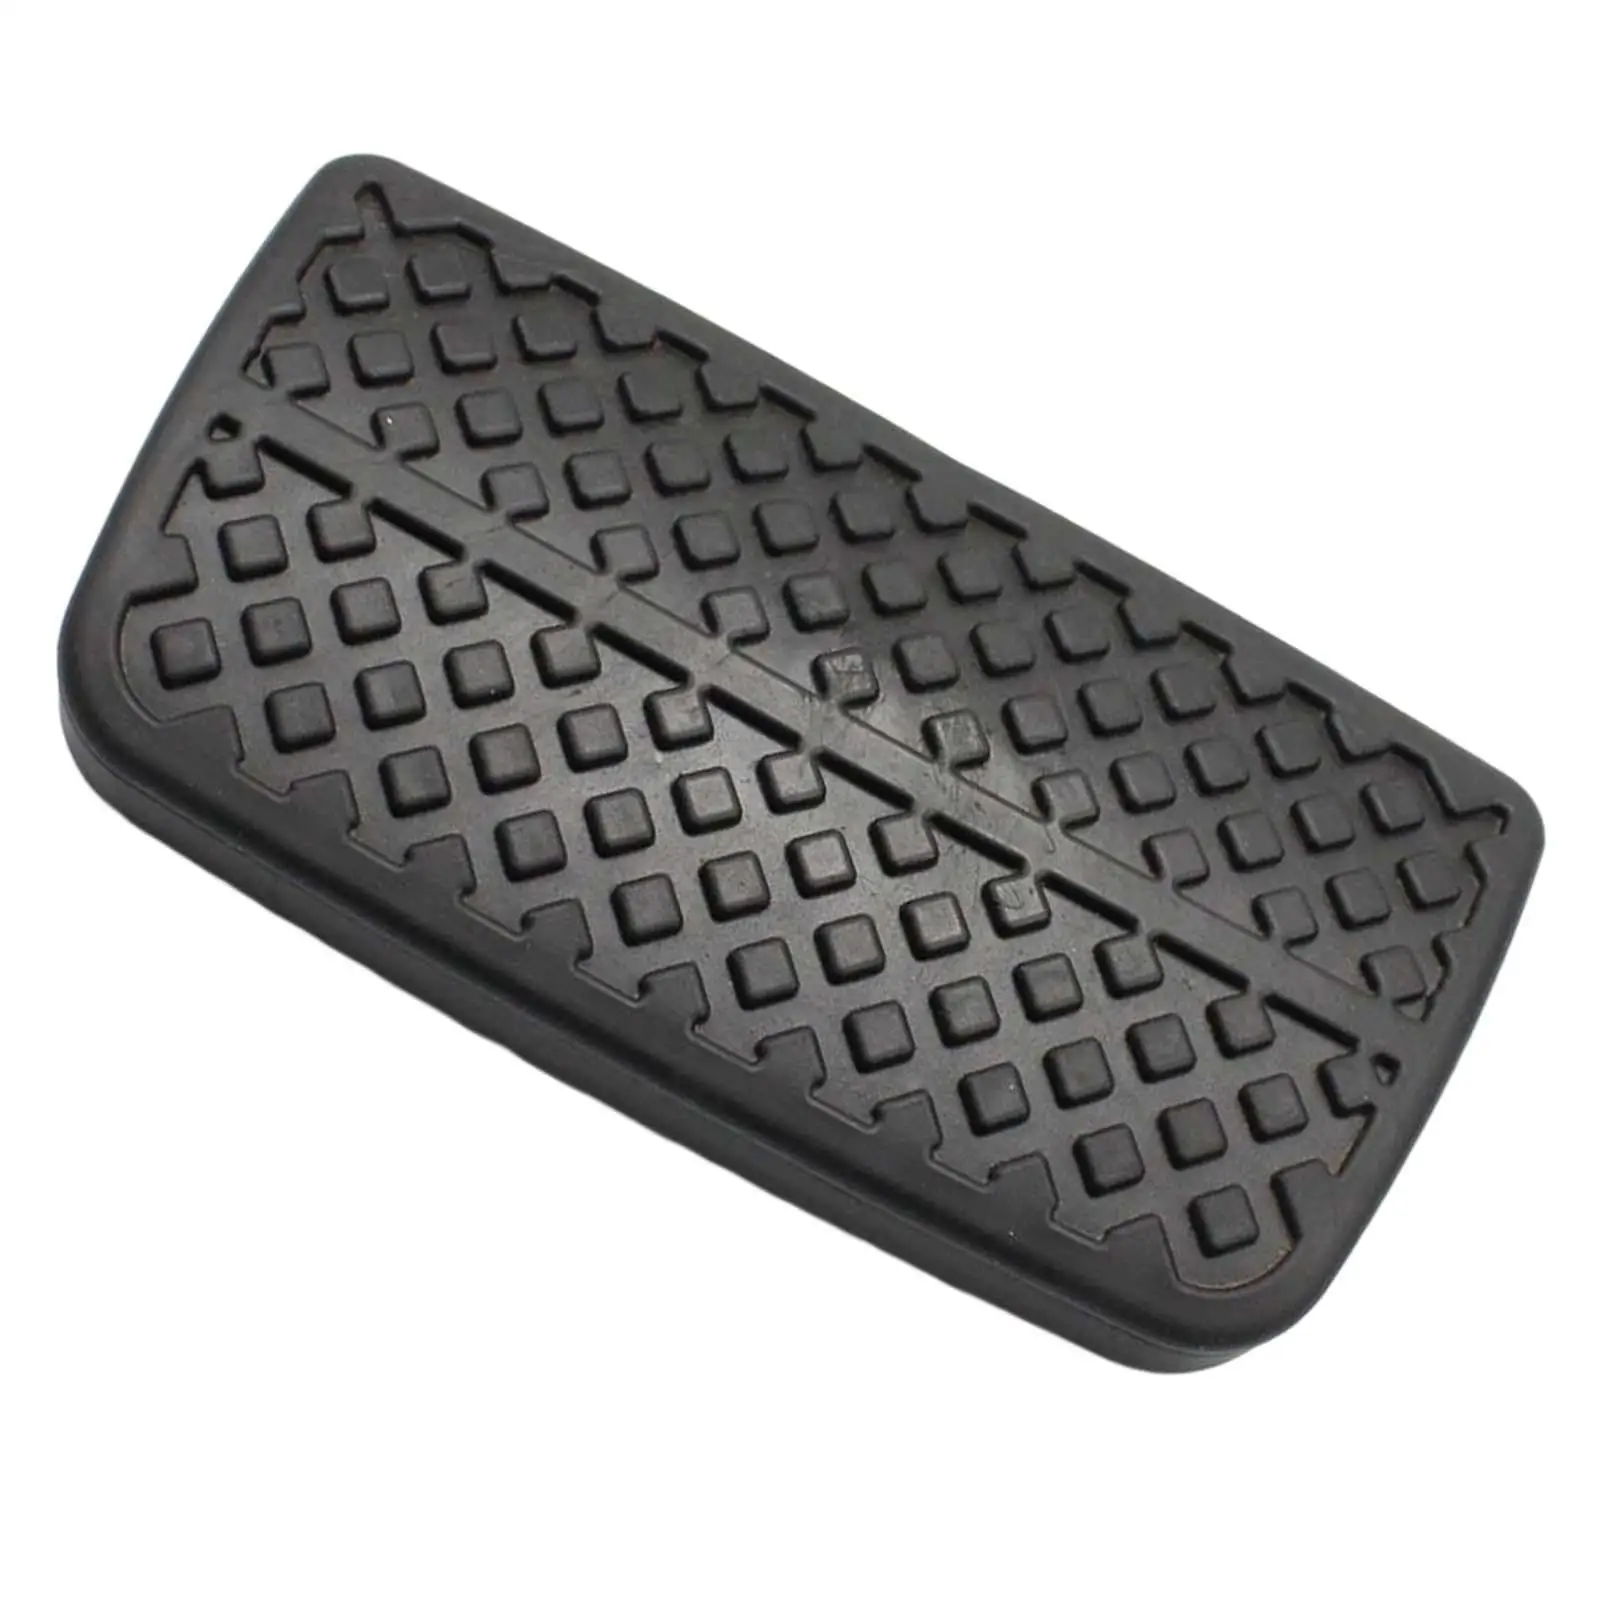 Car Rubber Brake Pedal Cover 46545-s1F-981 replacements for Honda Insight 2010-2014 Sturdy Vehicle Spare Parts Comfortable